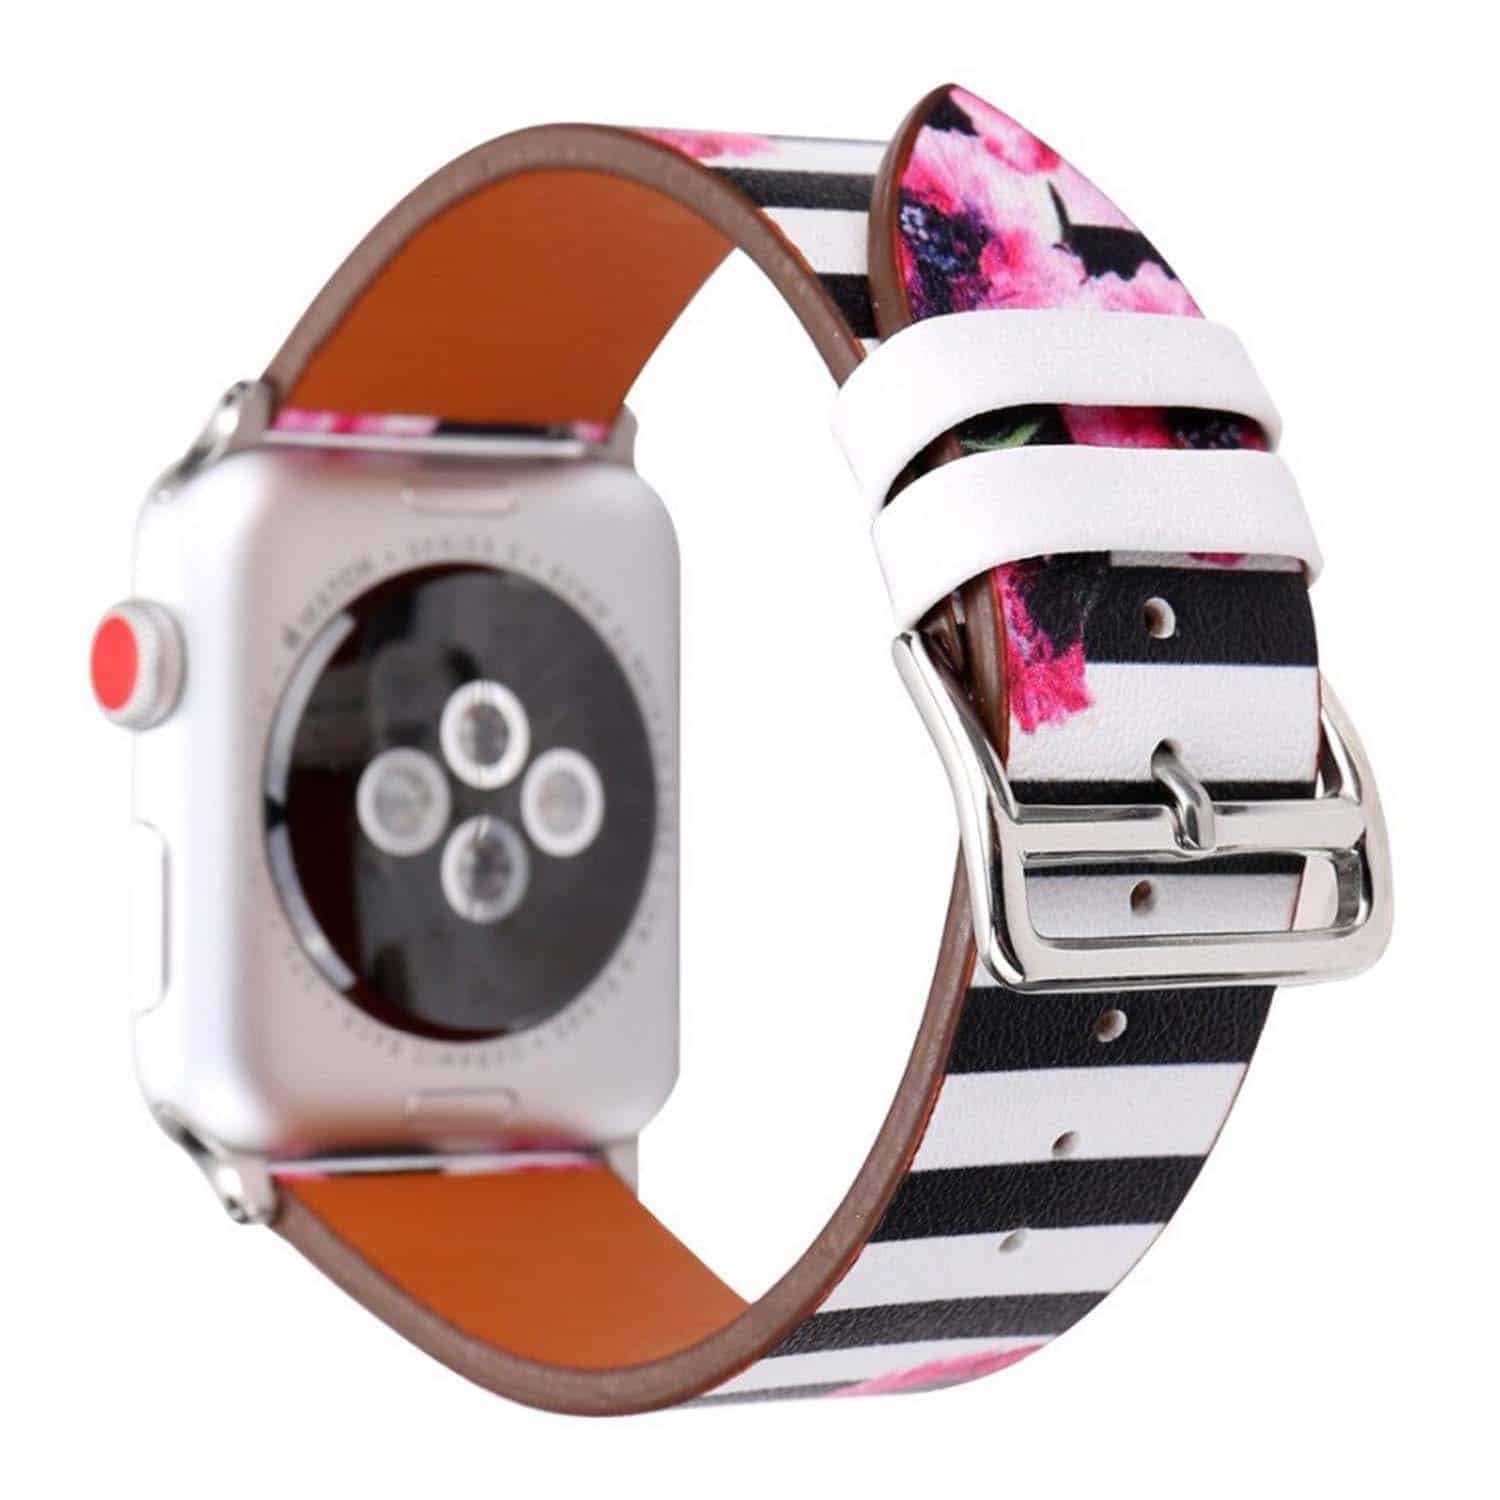 FocusFit – Apple Genuine Leather Classic Replacement Square Buckle Strap